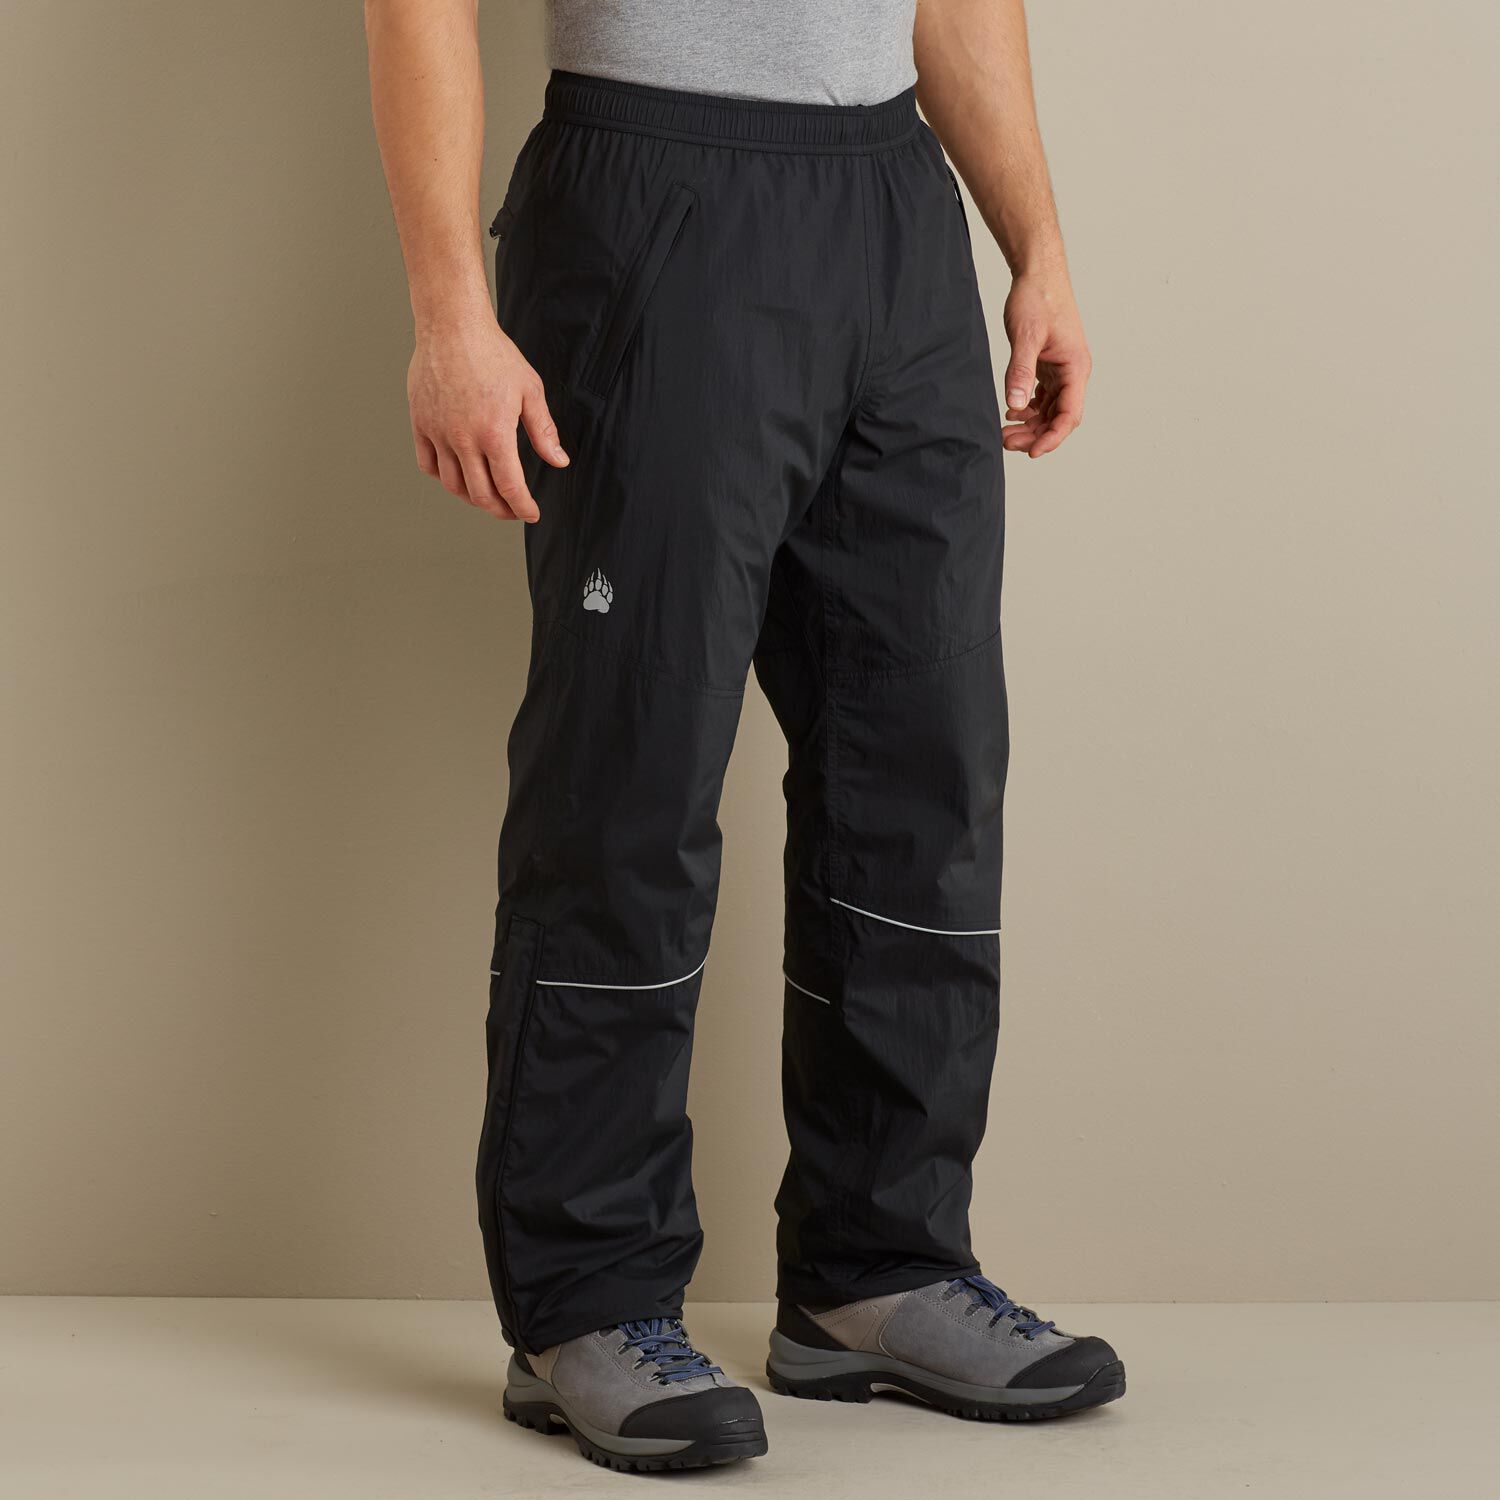 Womens Flexpedition Bootcut Pants  Duluth Trading Company